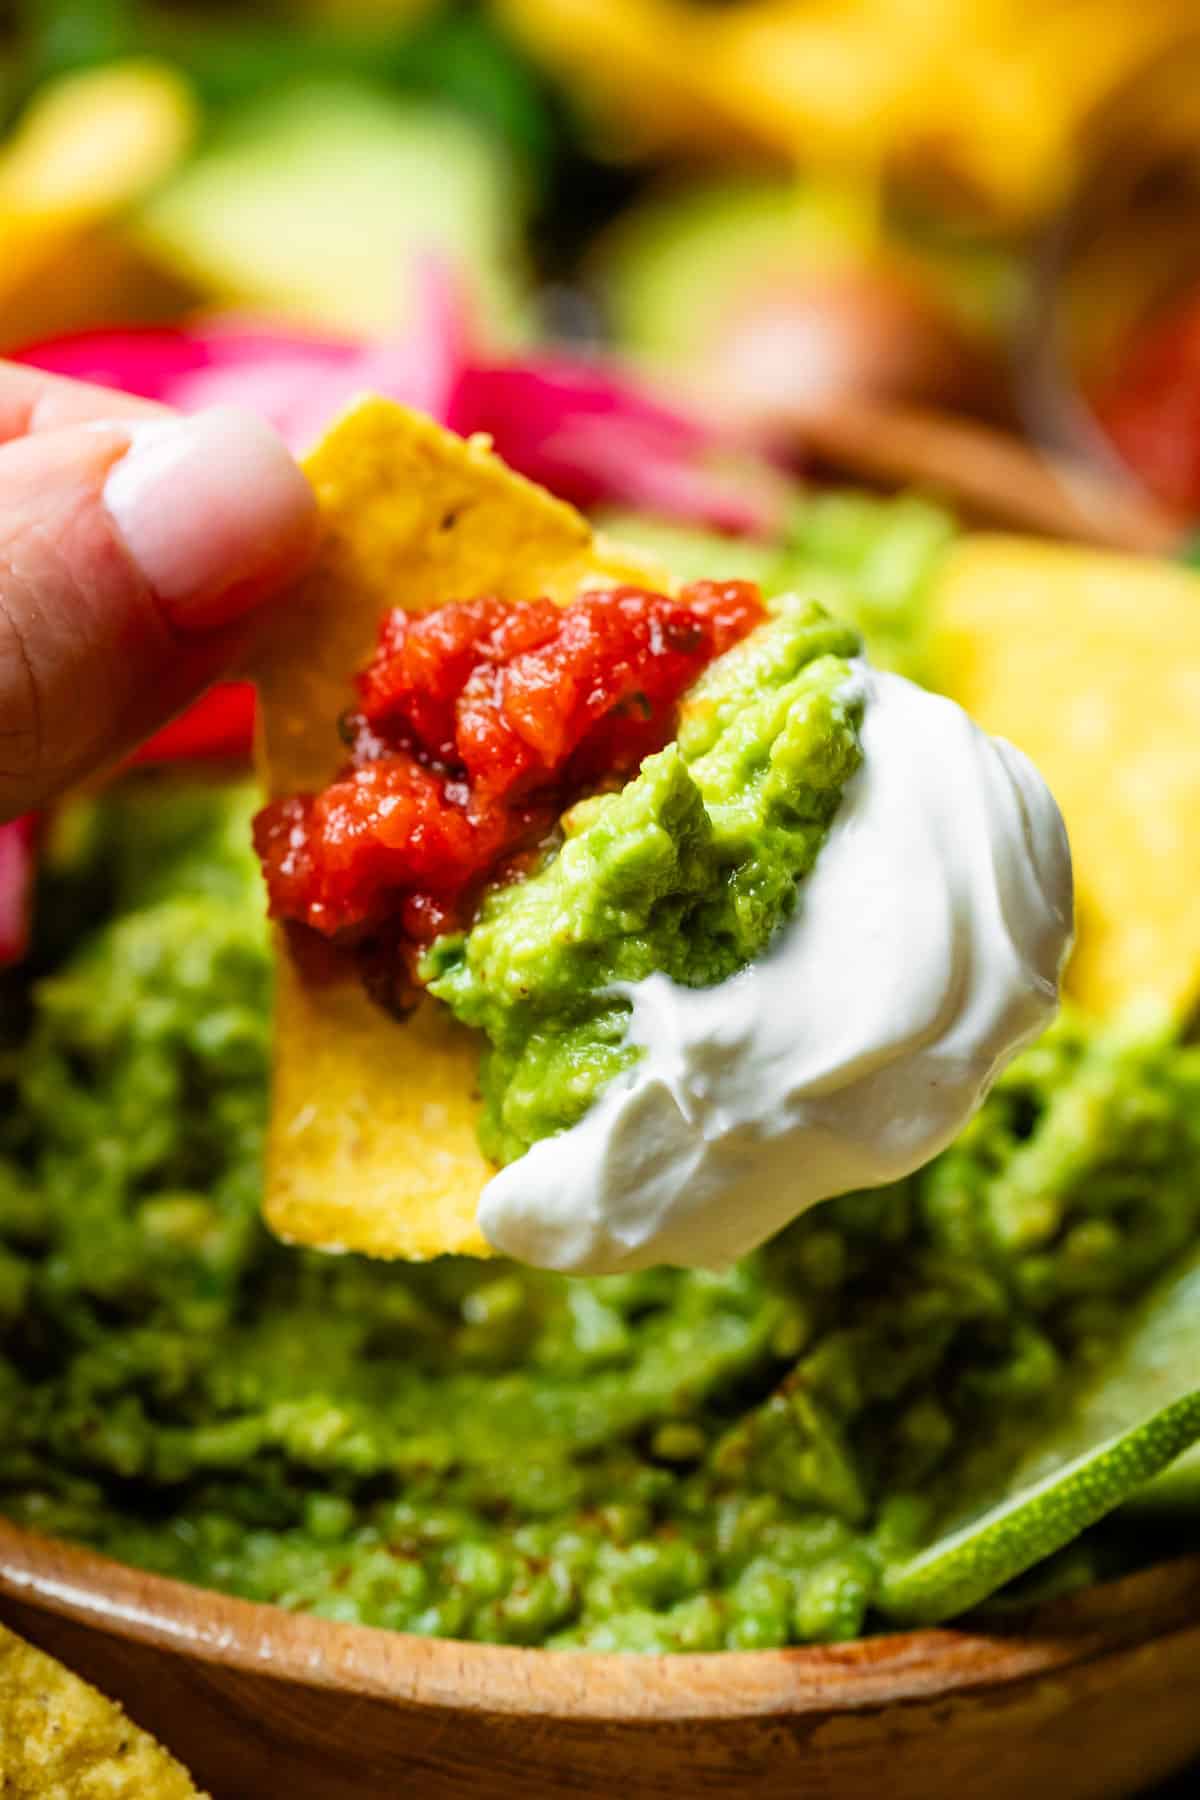 finger and thumb holding a chip loaded with guacamole, salsa, and sour cream.